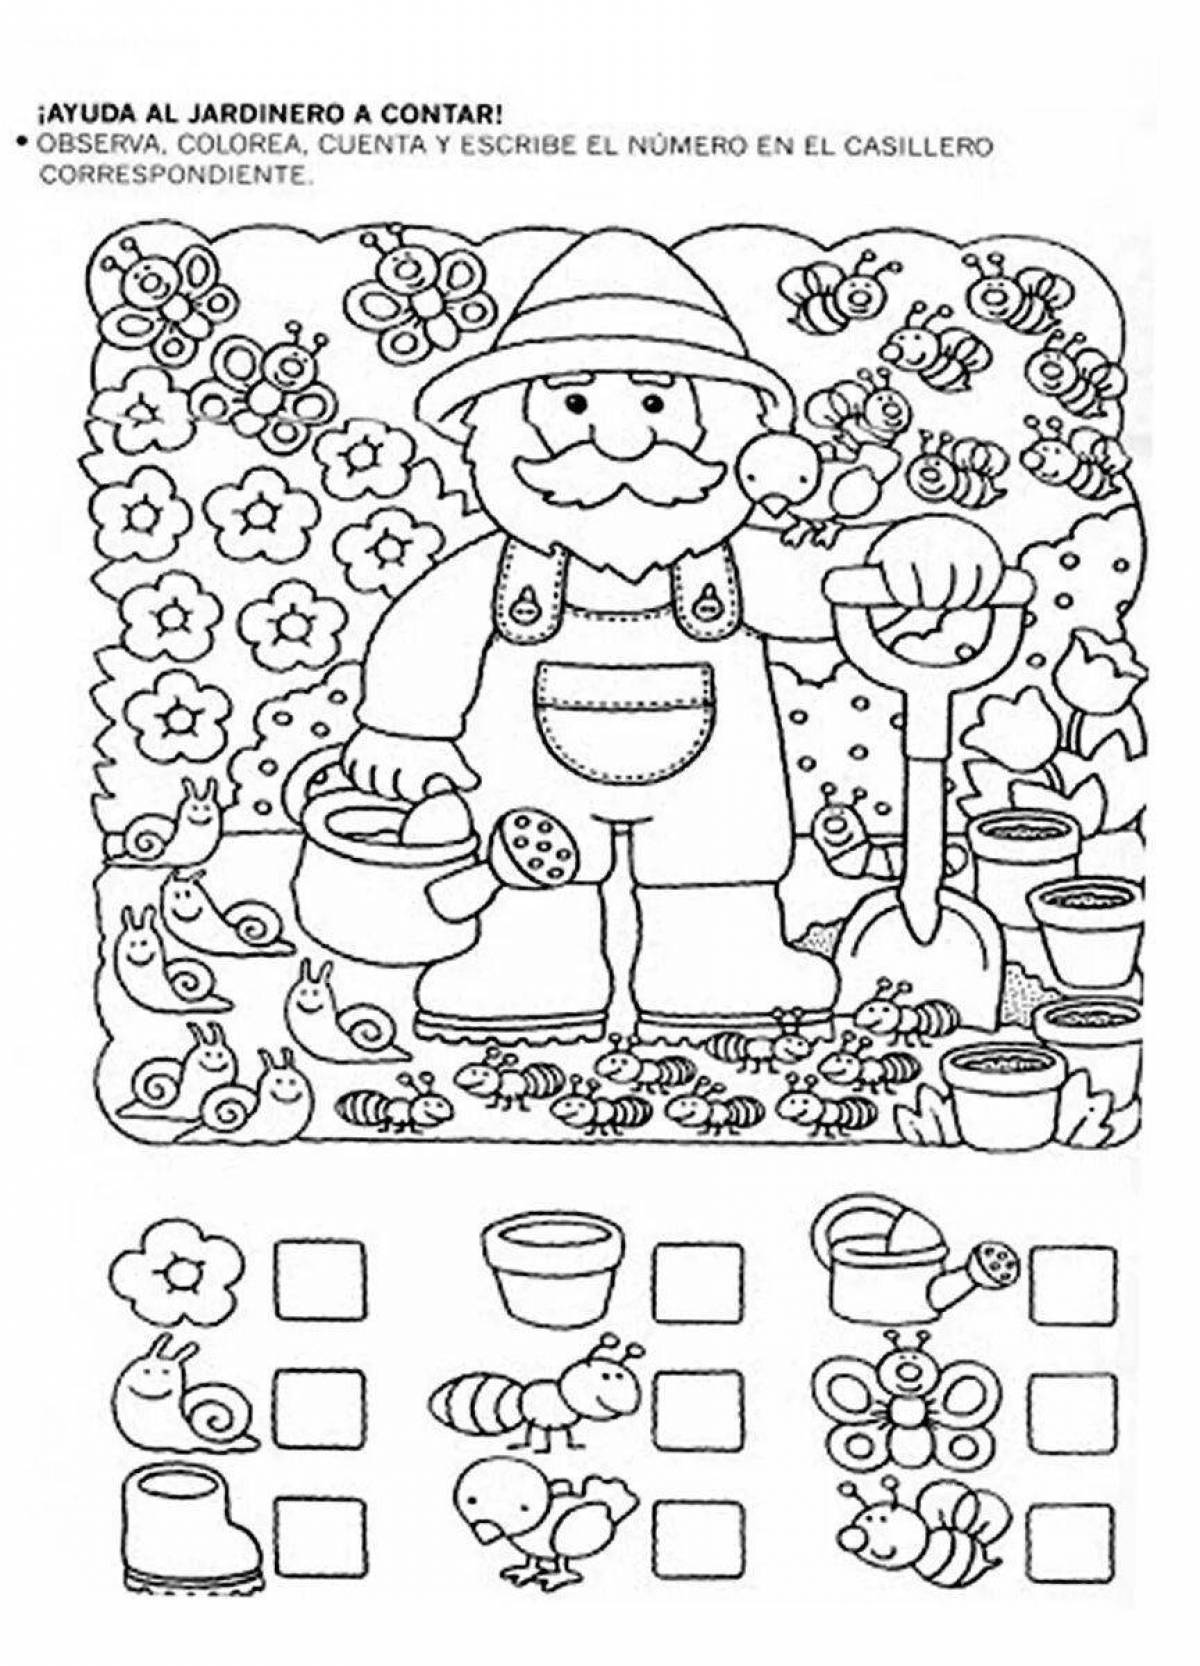 Attention stimulating coloring book for 7-8 year olds